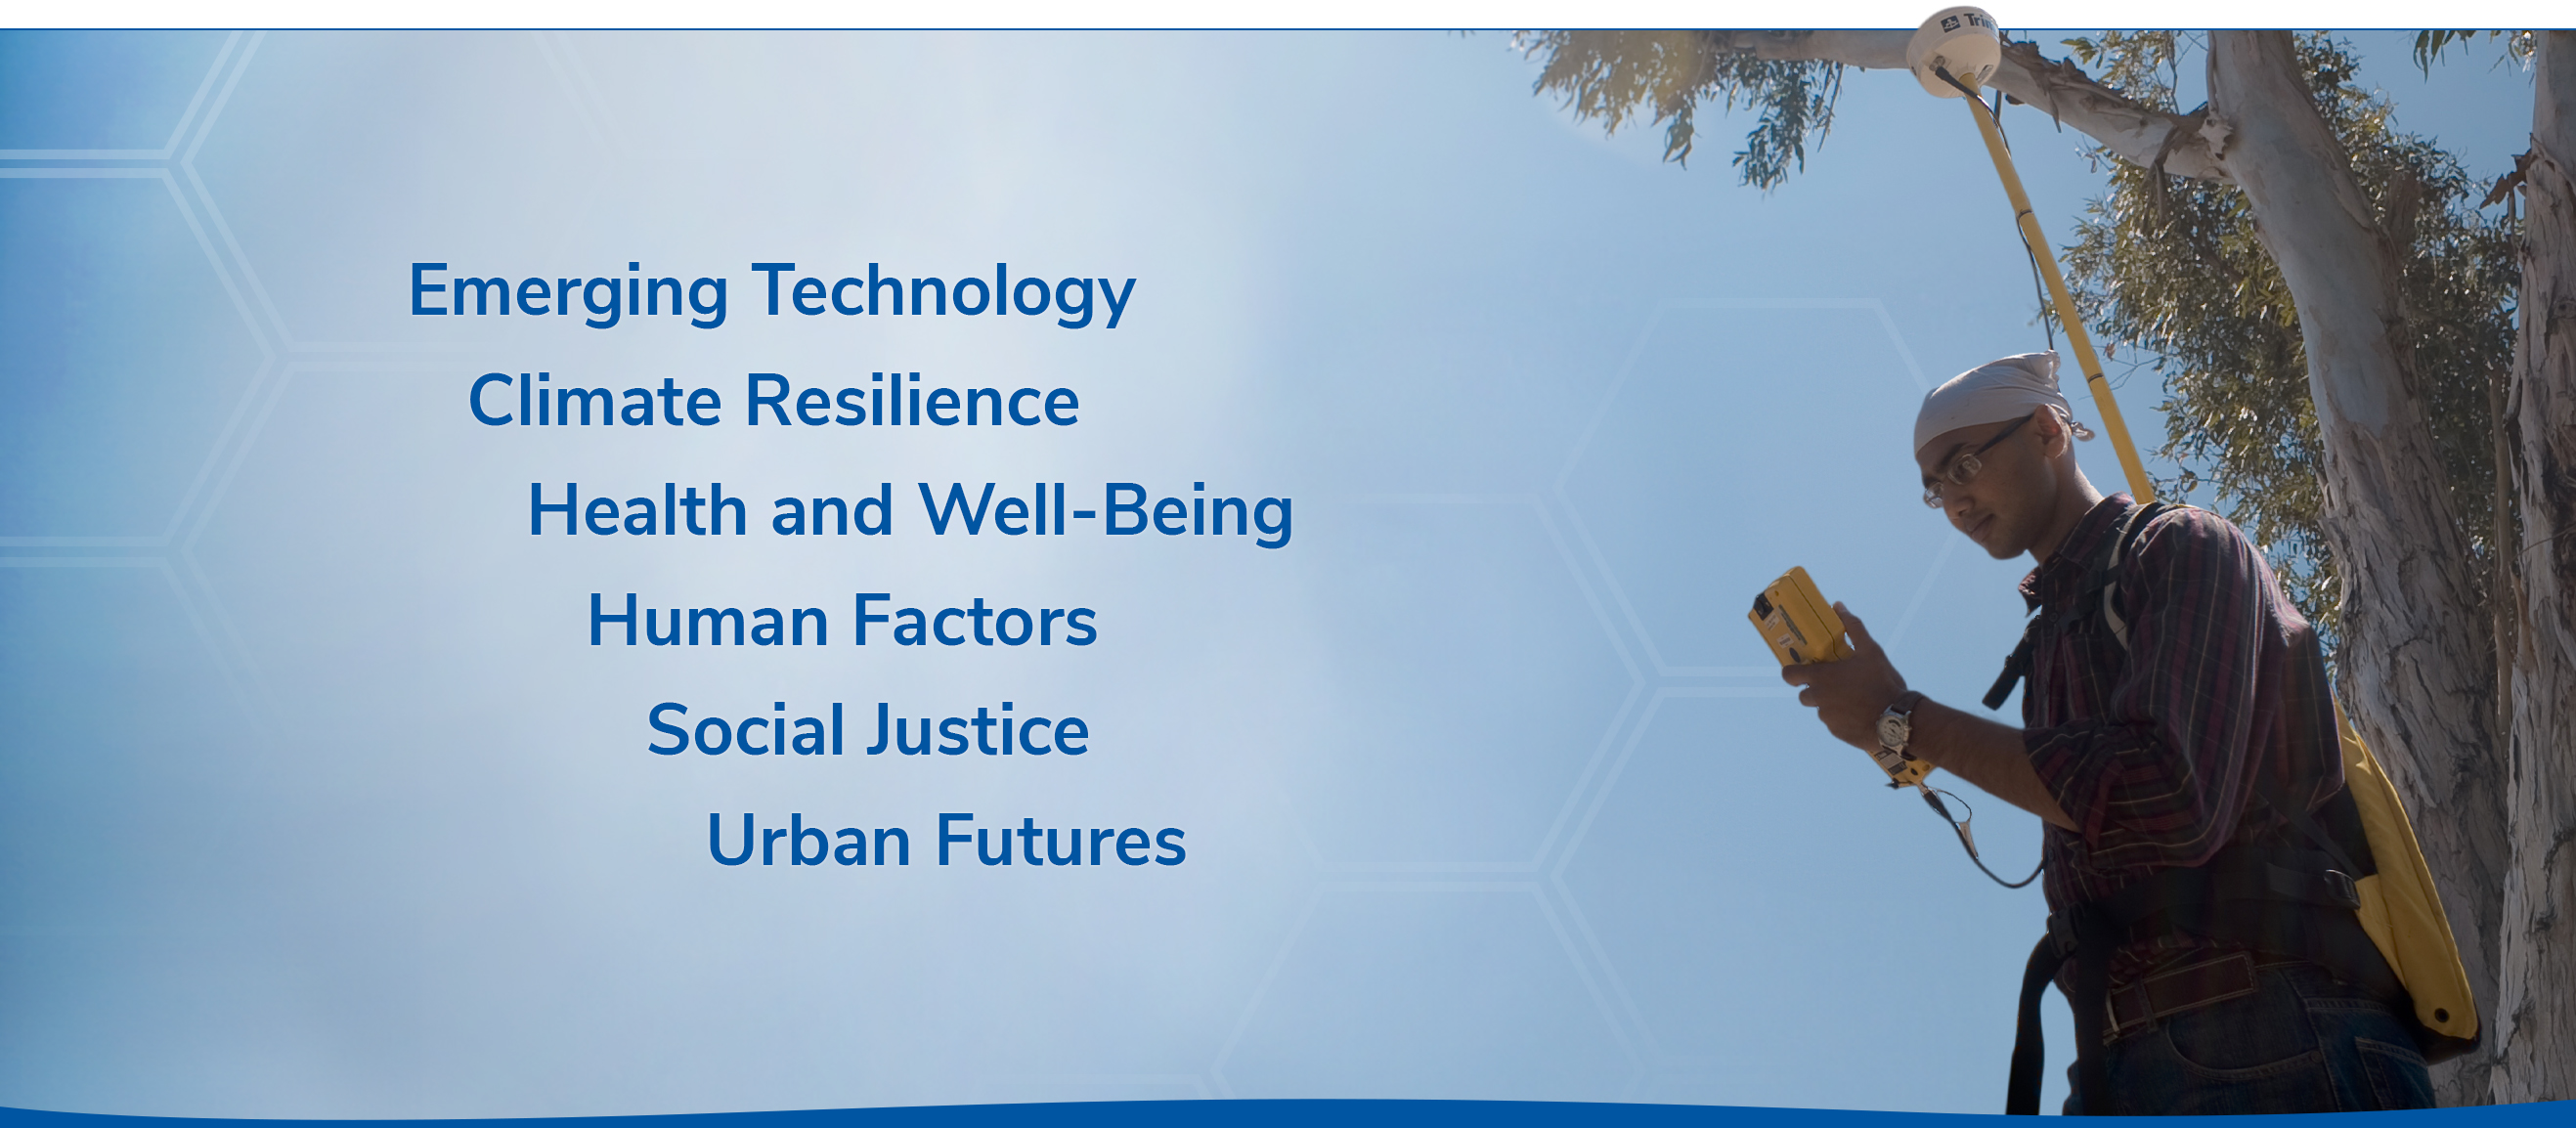 Person holds scientific survey equipment while standing in front of tree.  Text advertising the main strength categories linked below: Emerging Technology, Climate Resilience, Health and Well-Being, Human Factors, Social Justice, Urban Futures